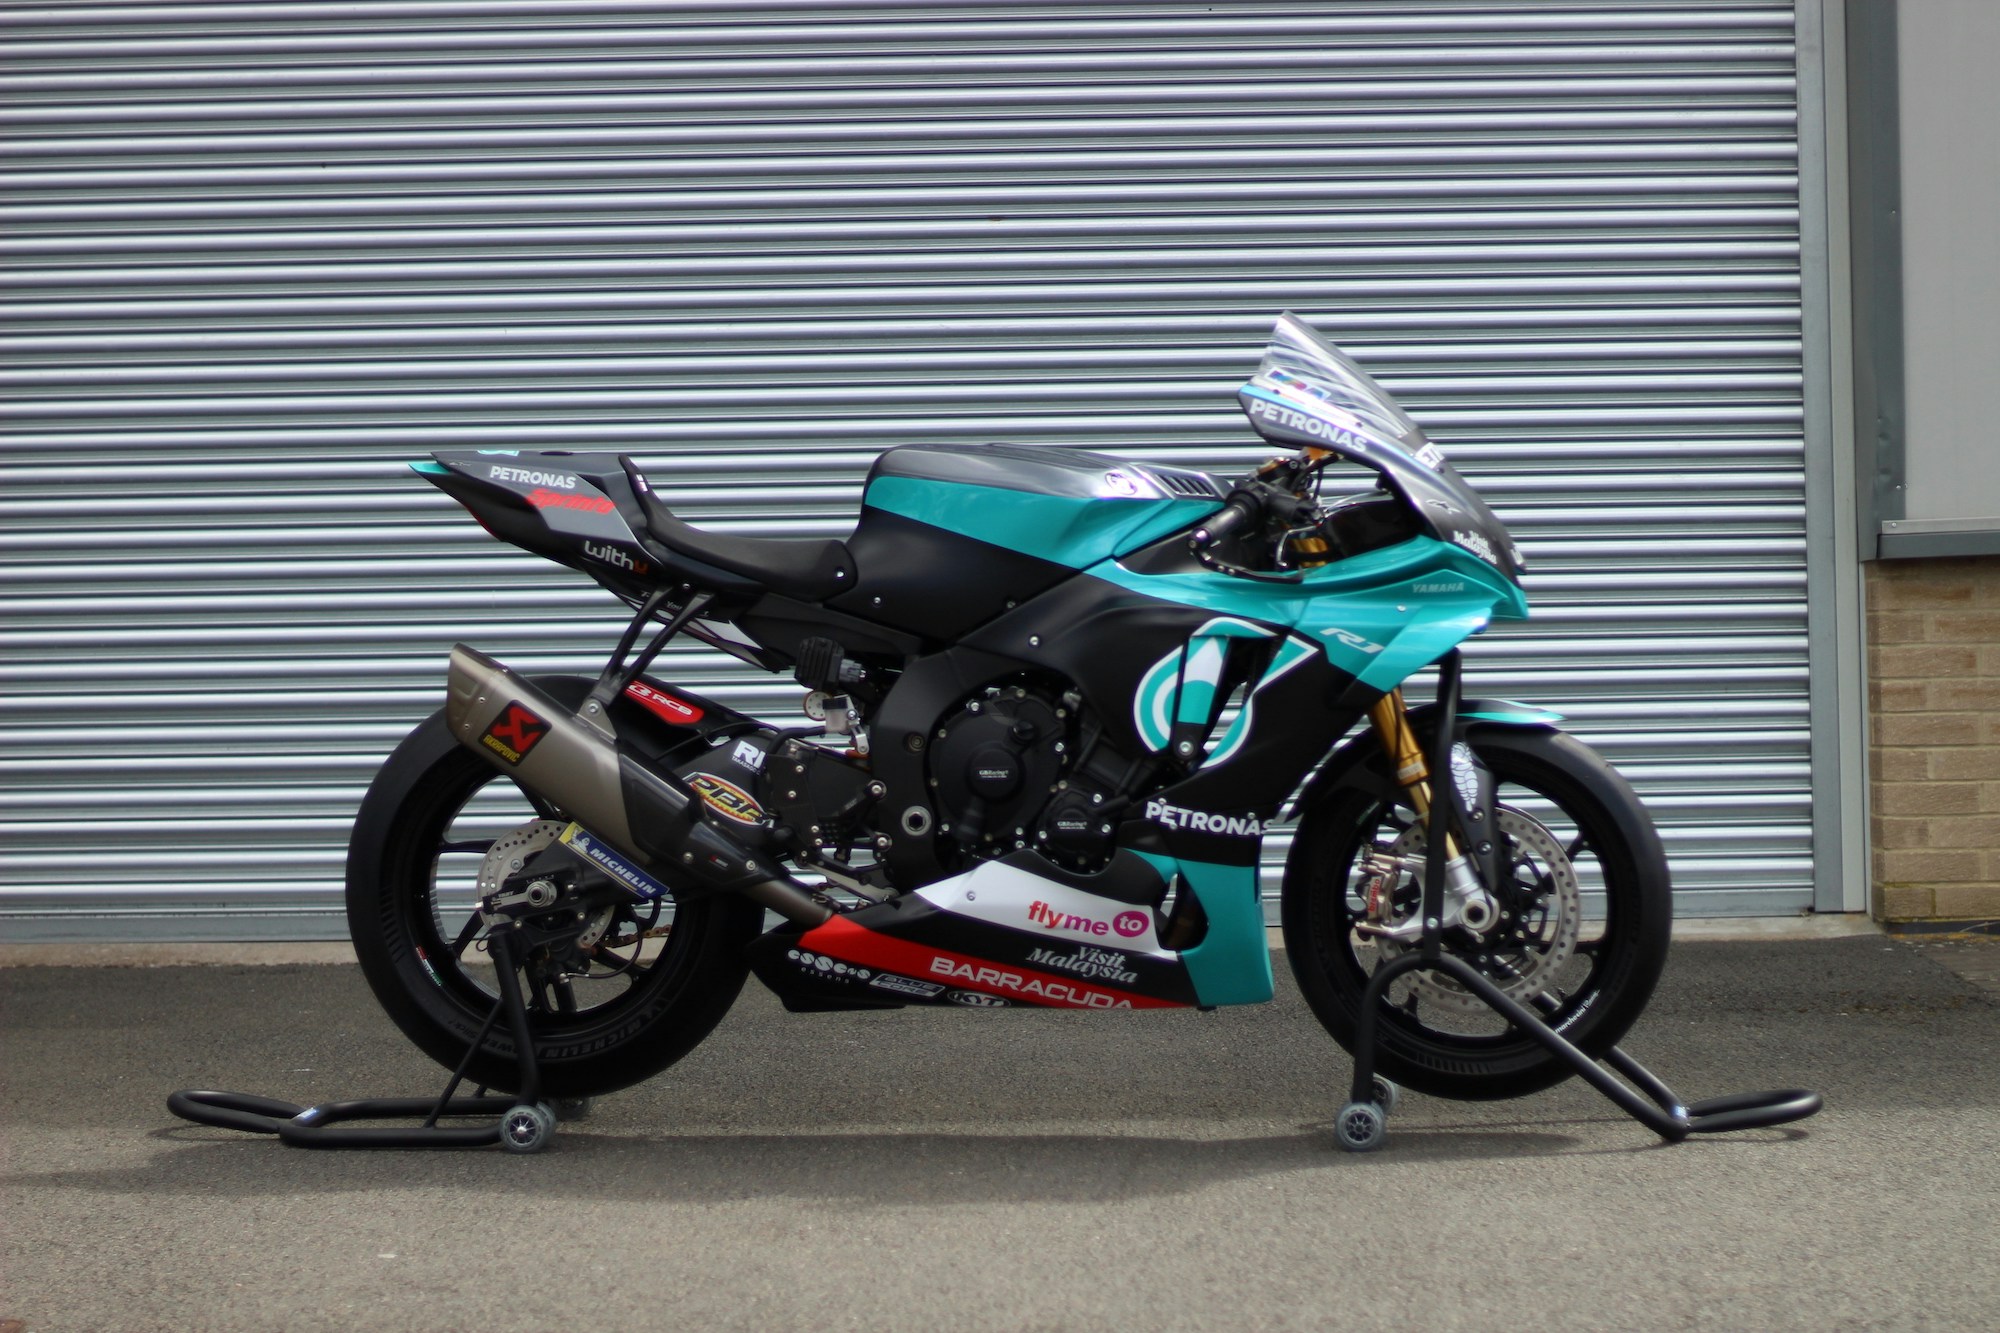 2020 PETRONAS YAMAHA YZF-R1 #15 OF 46 for sale by auction in Gloucester,  Gloucestershire, United Kingdom